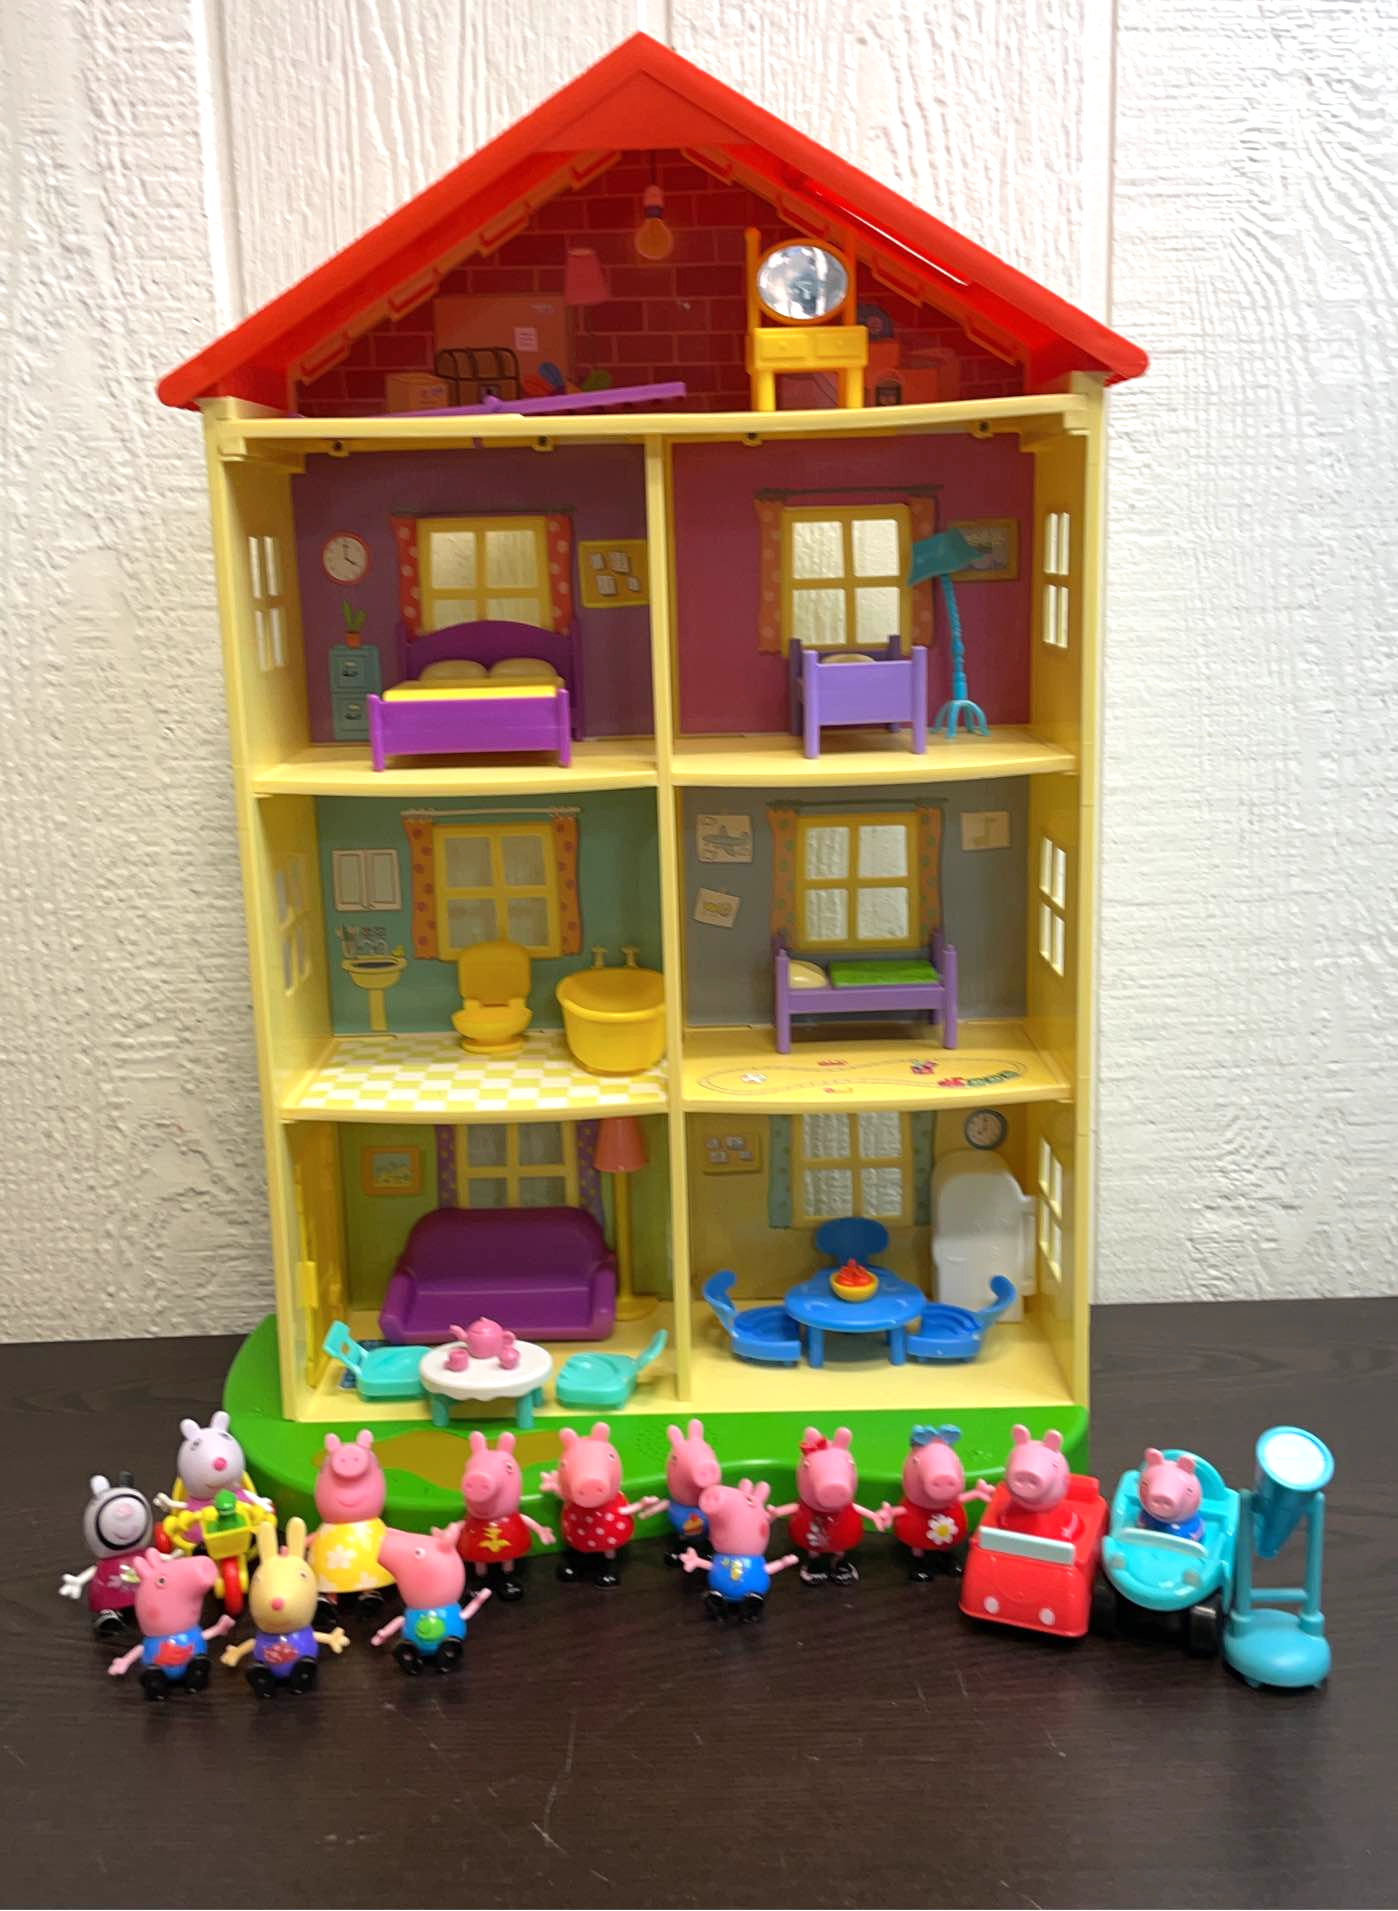 Wooden Dollhouse Peppa Pig with Accessories